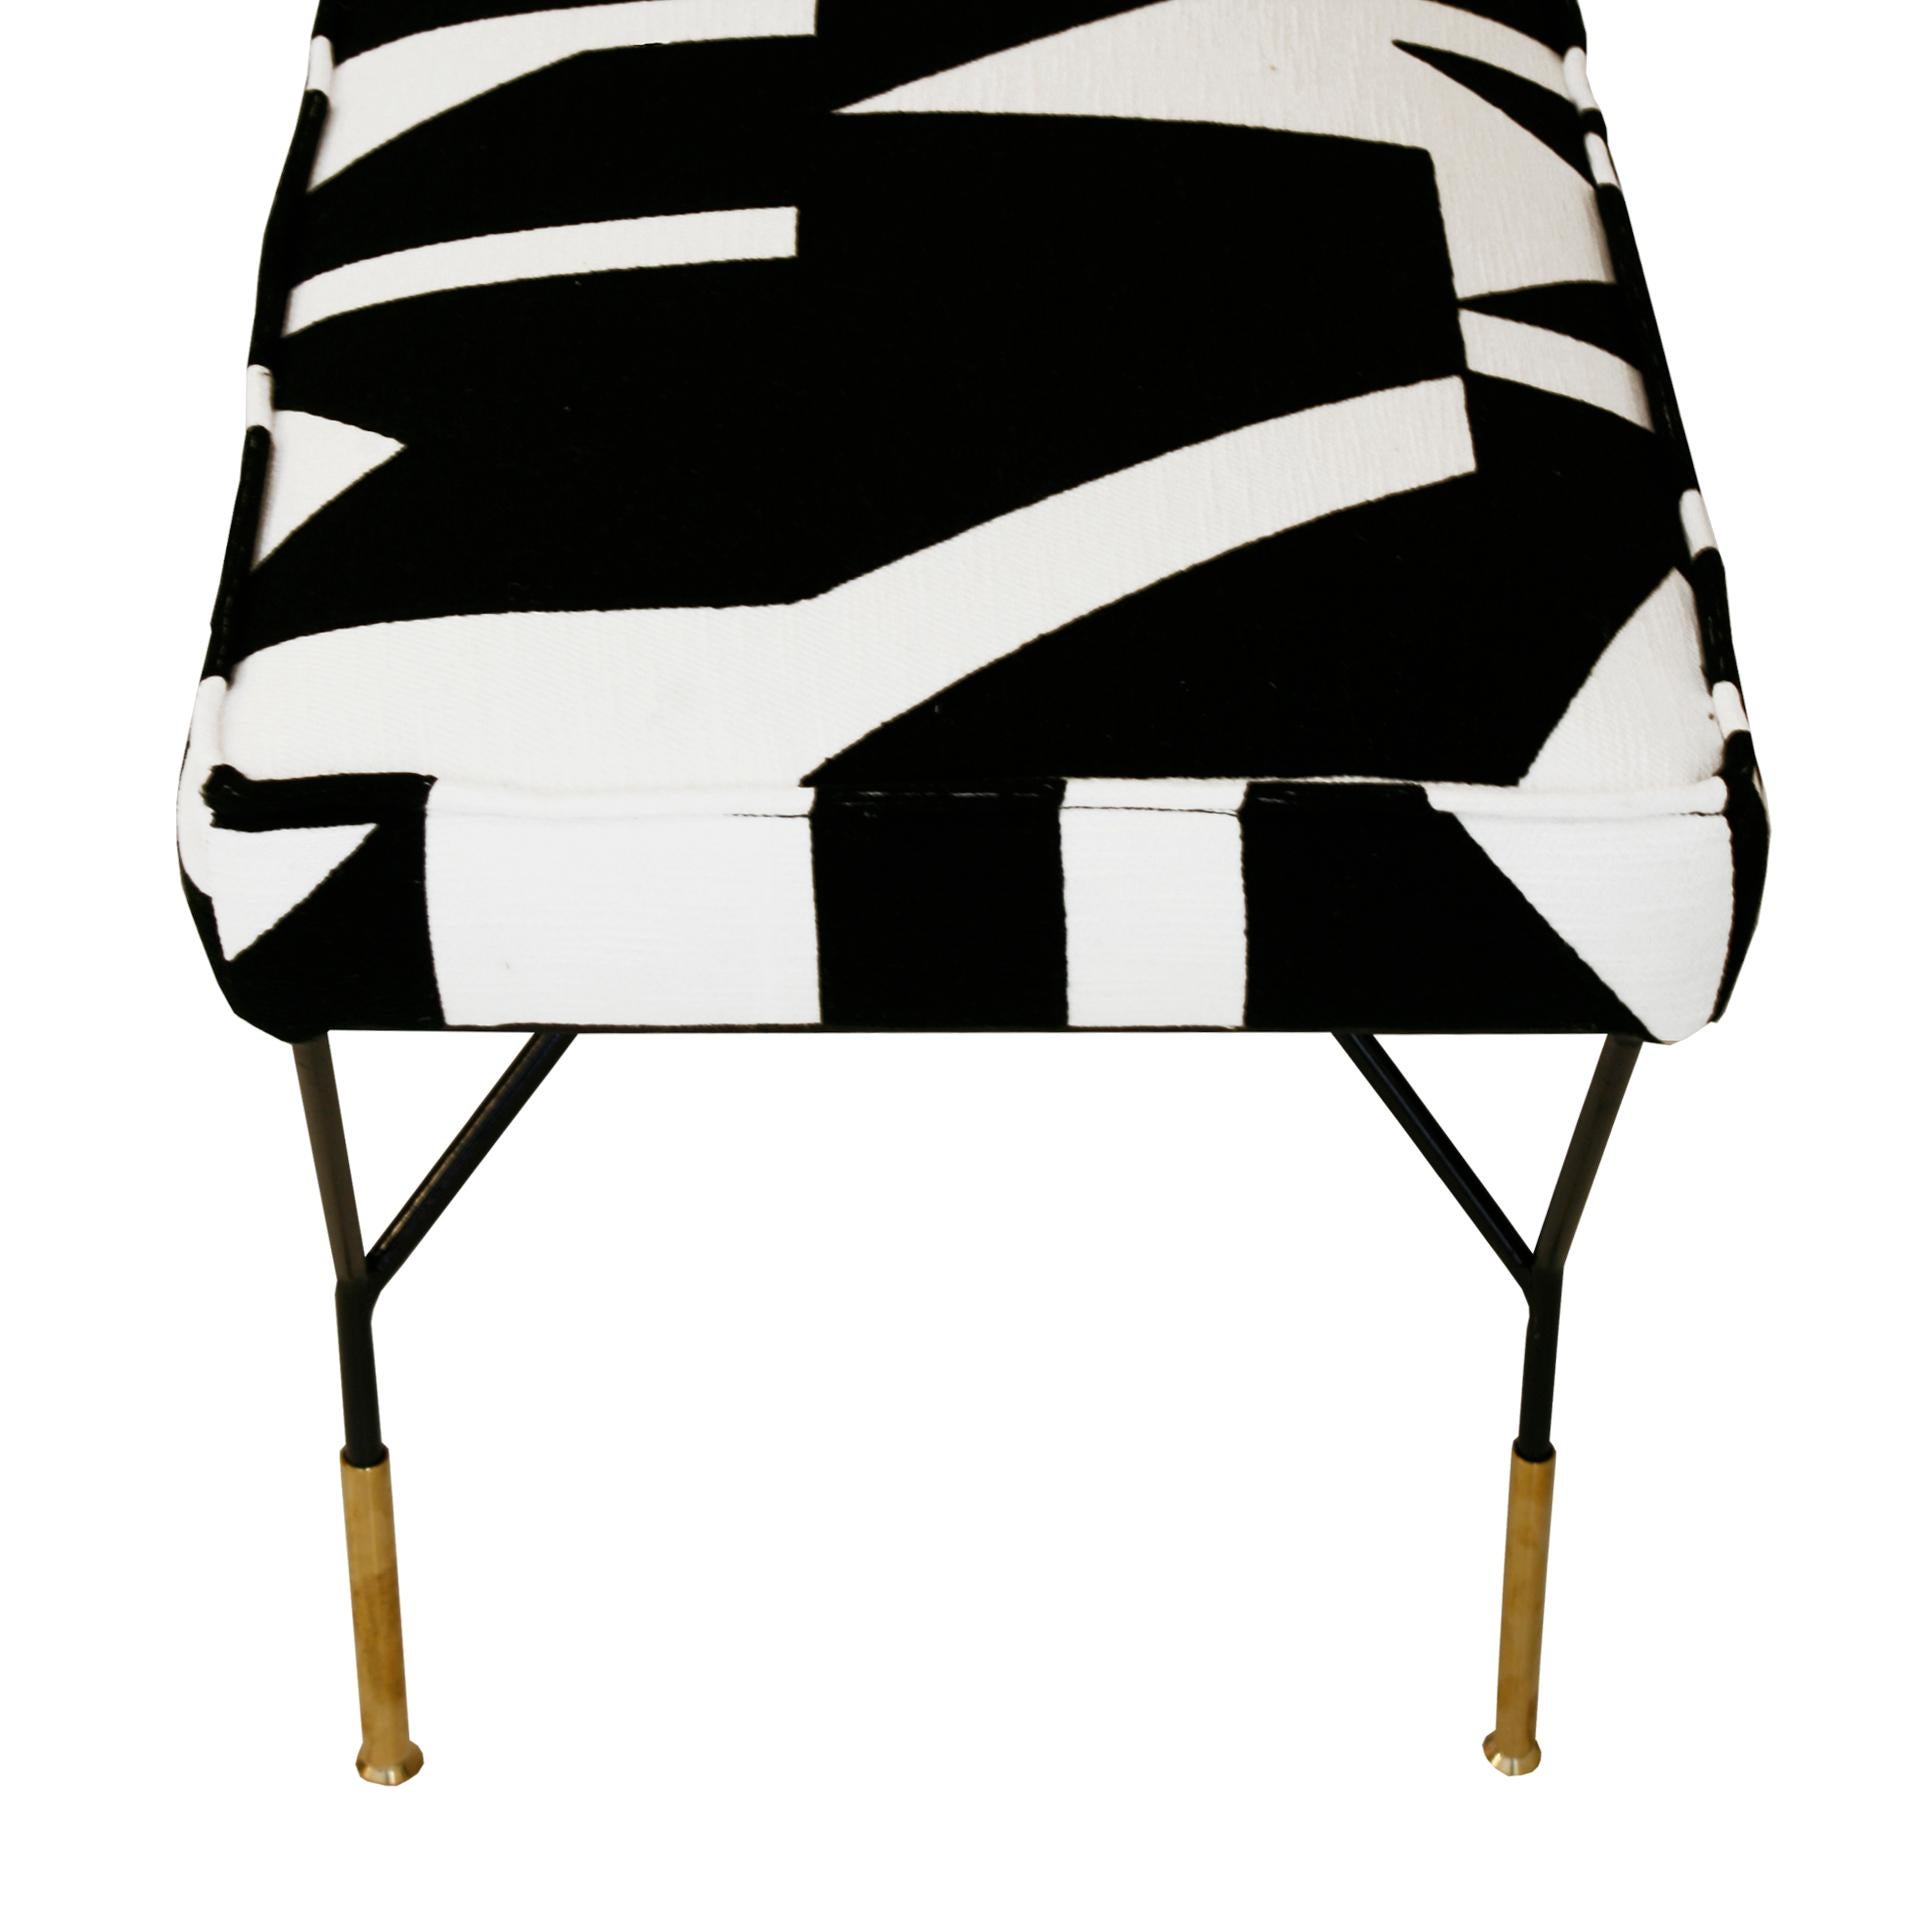 Late 20th Century Modern Black Lacquered Iron and Patterned Cotton 1970s Italian Stool For Sale